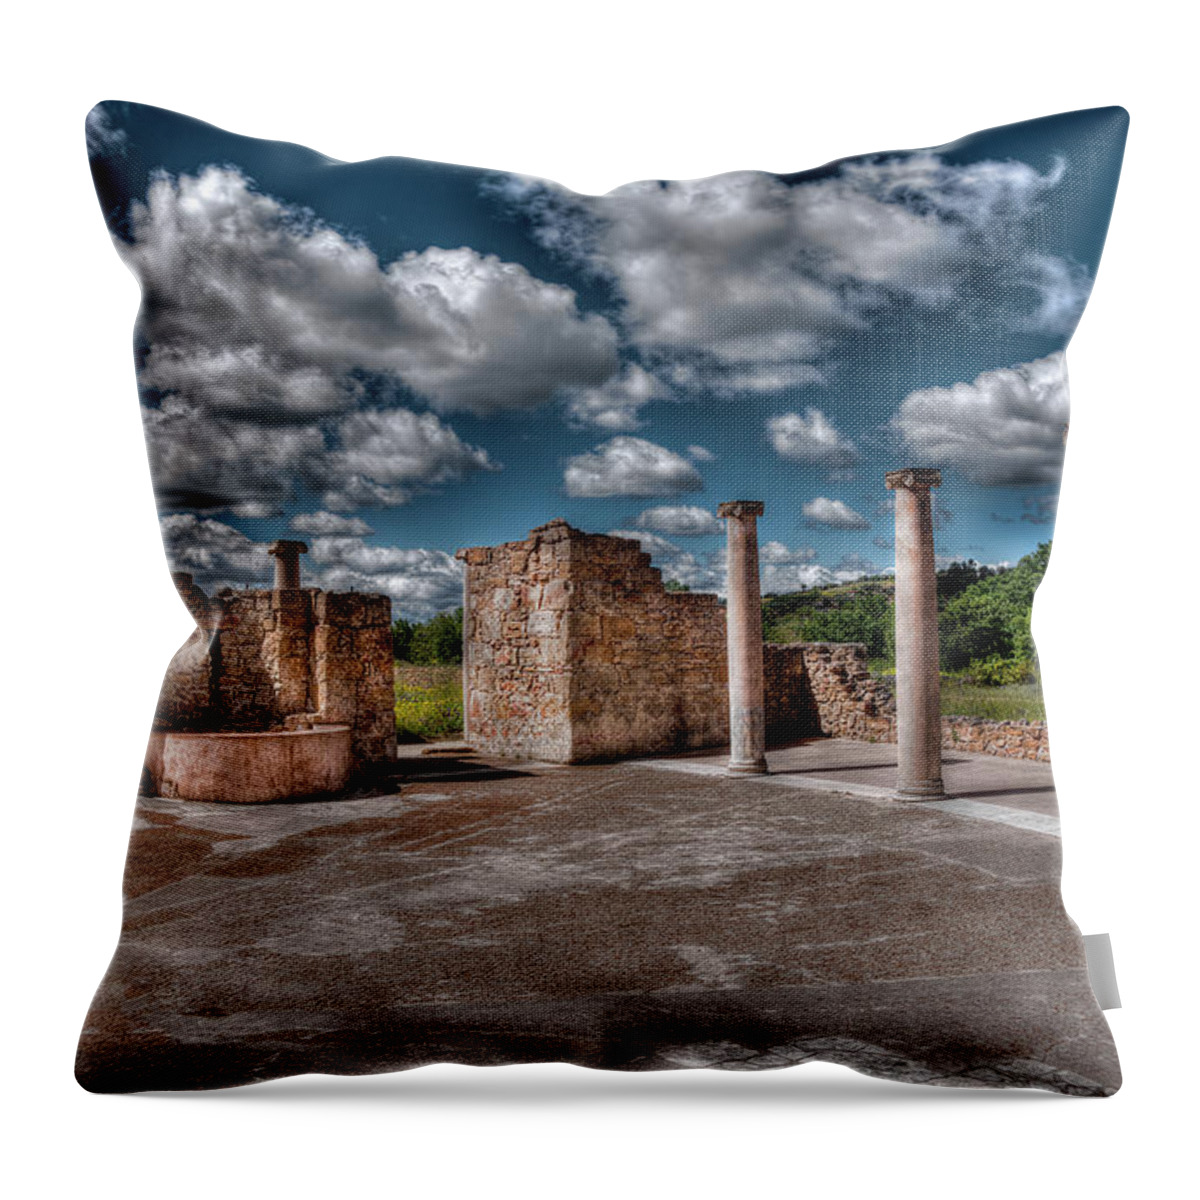  Throw Pillow featuring the photograph Roman Village by Patrick Boening